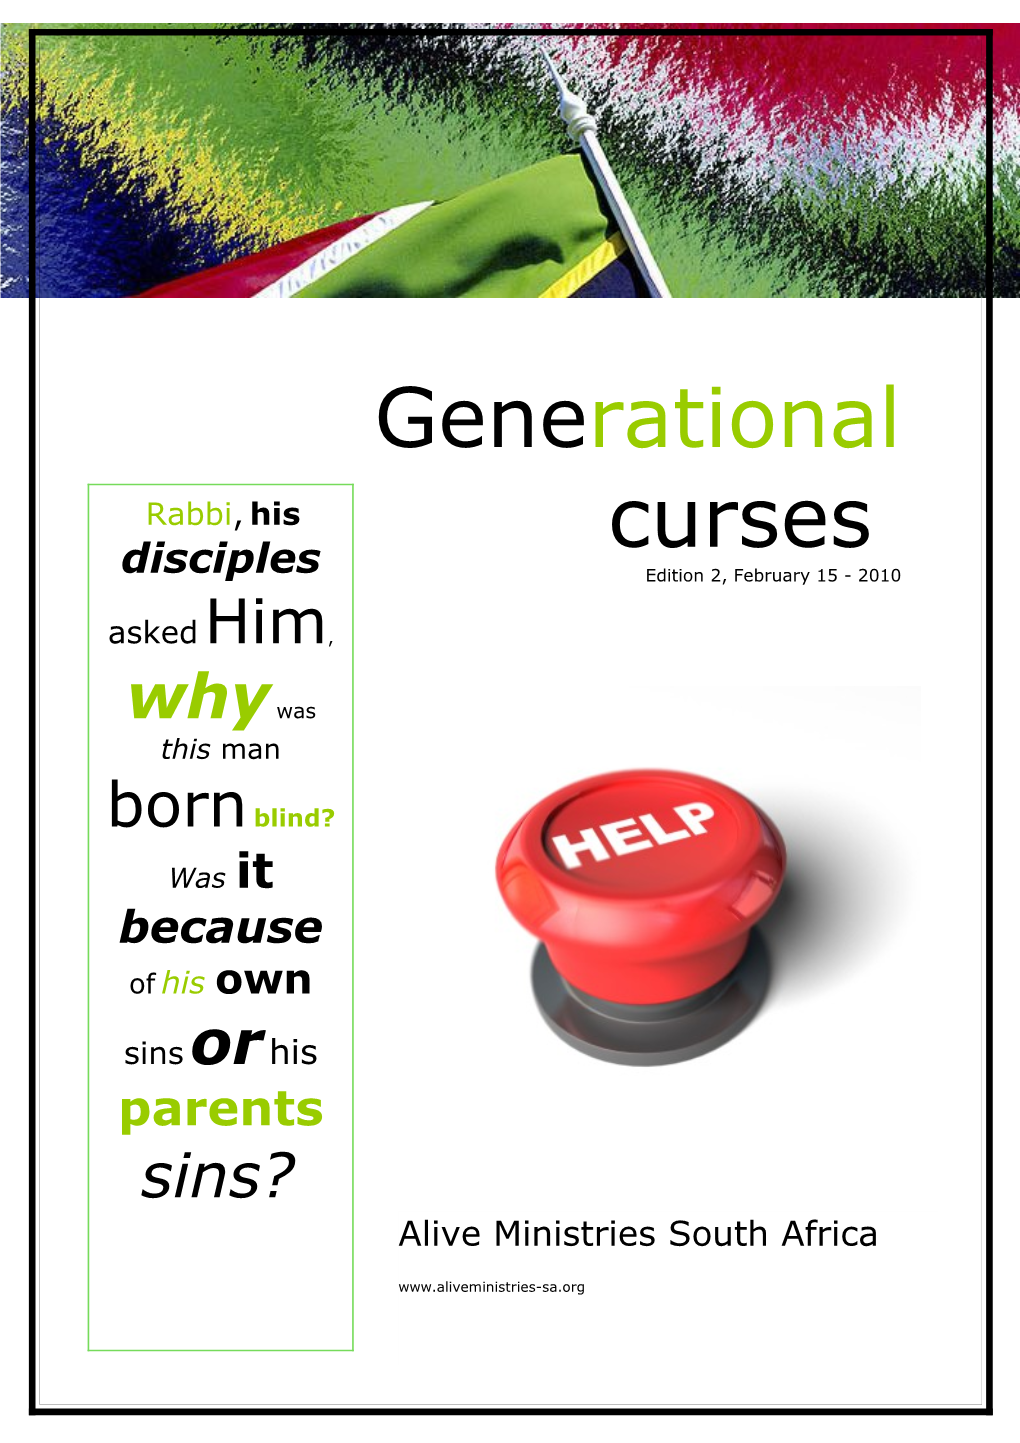 Generational Curses, Alive Ministries South Africa